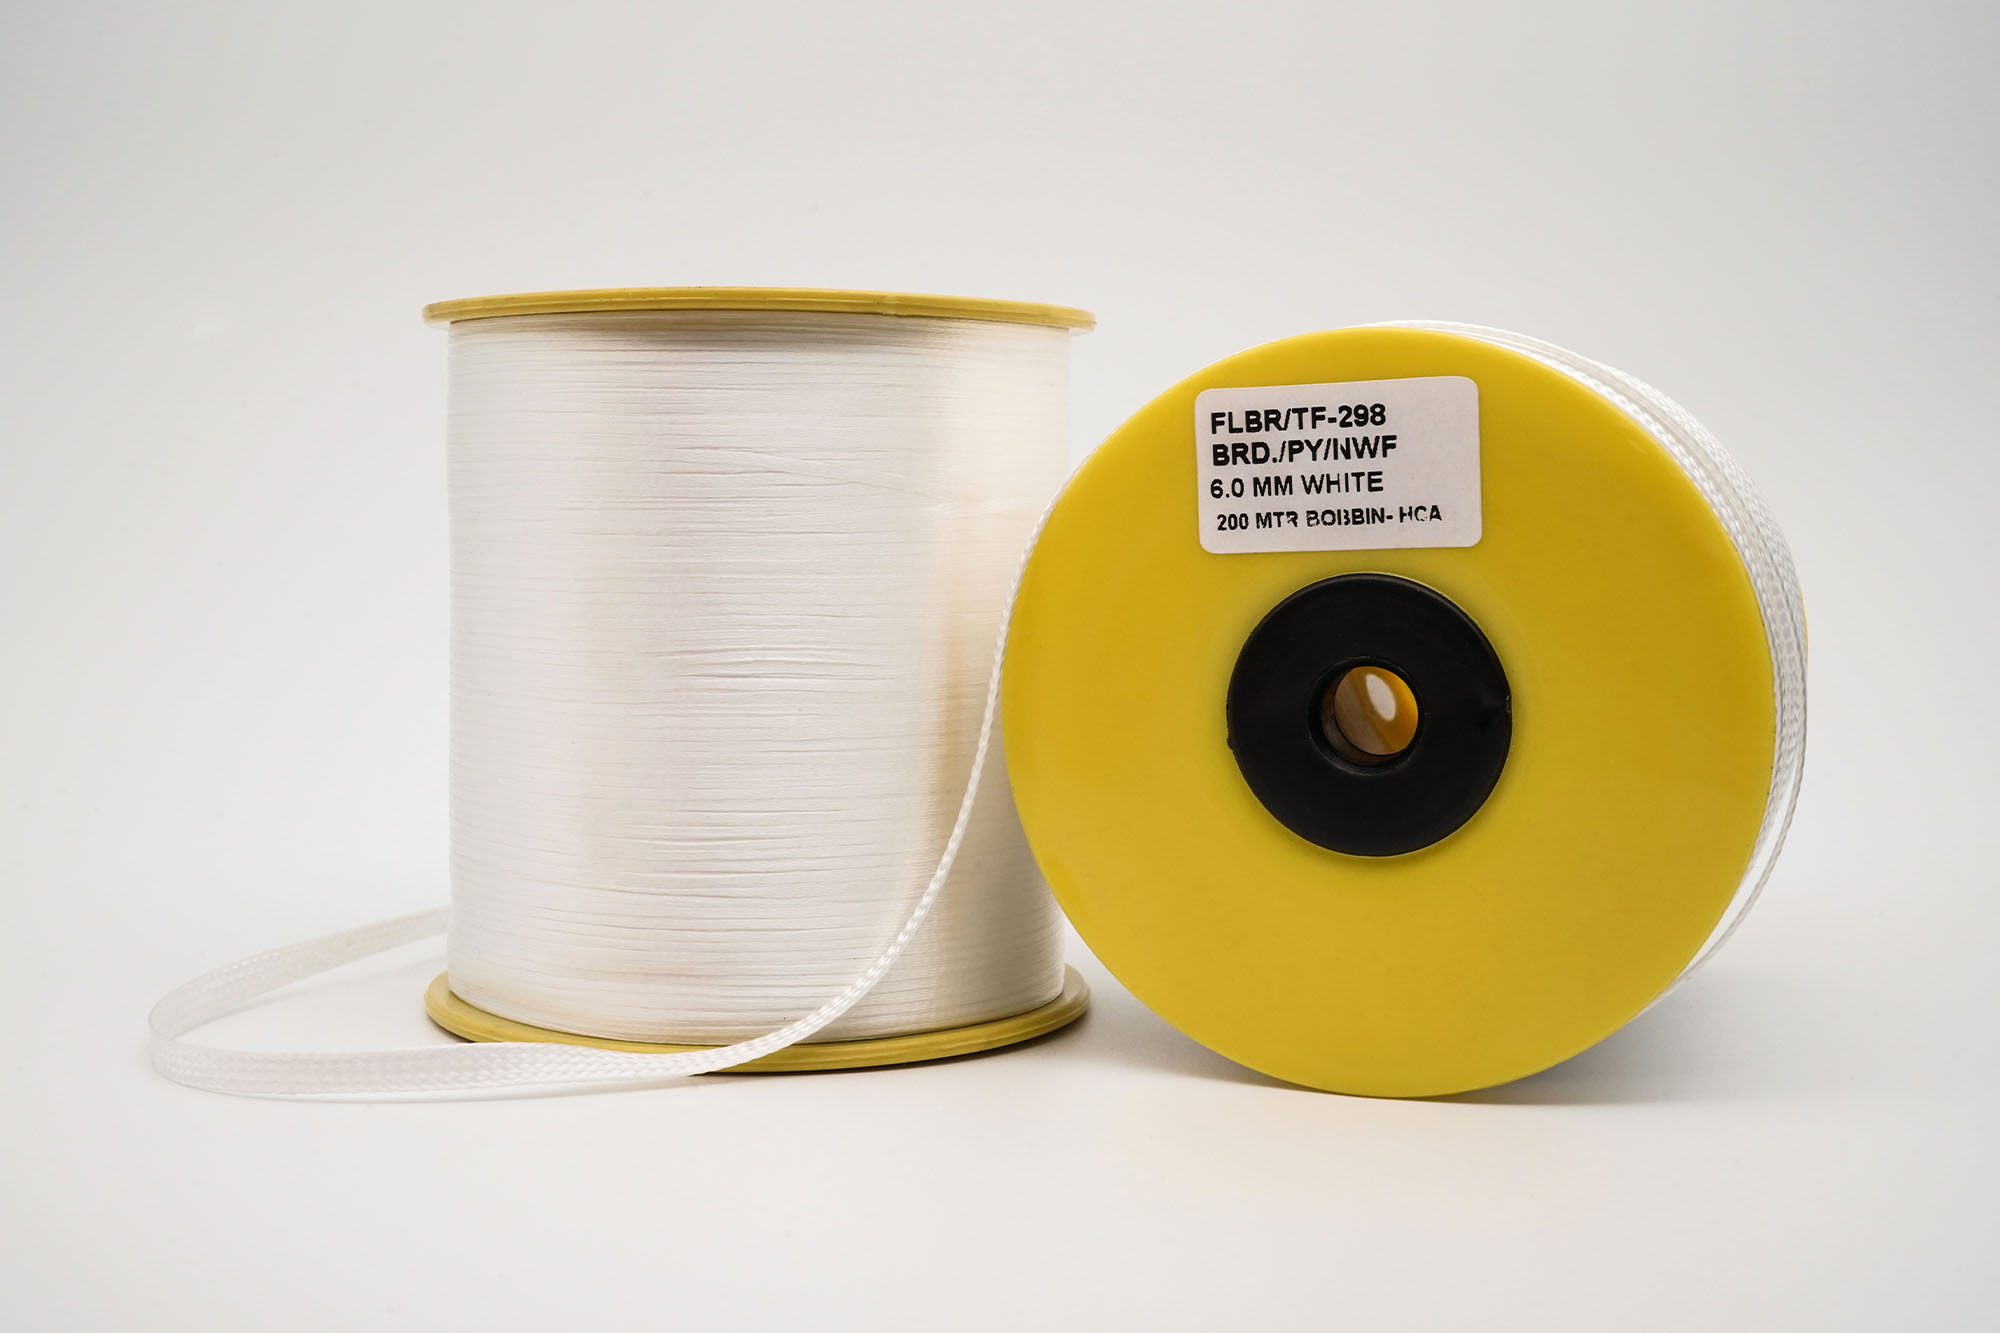 Polyester Reinforcement Braided Tape